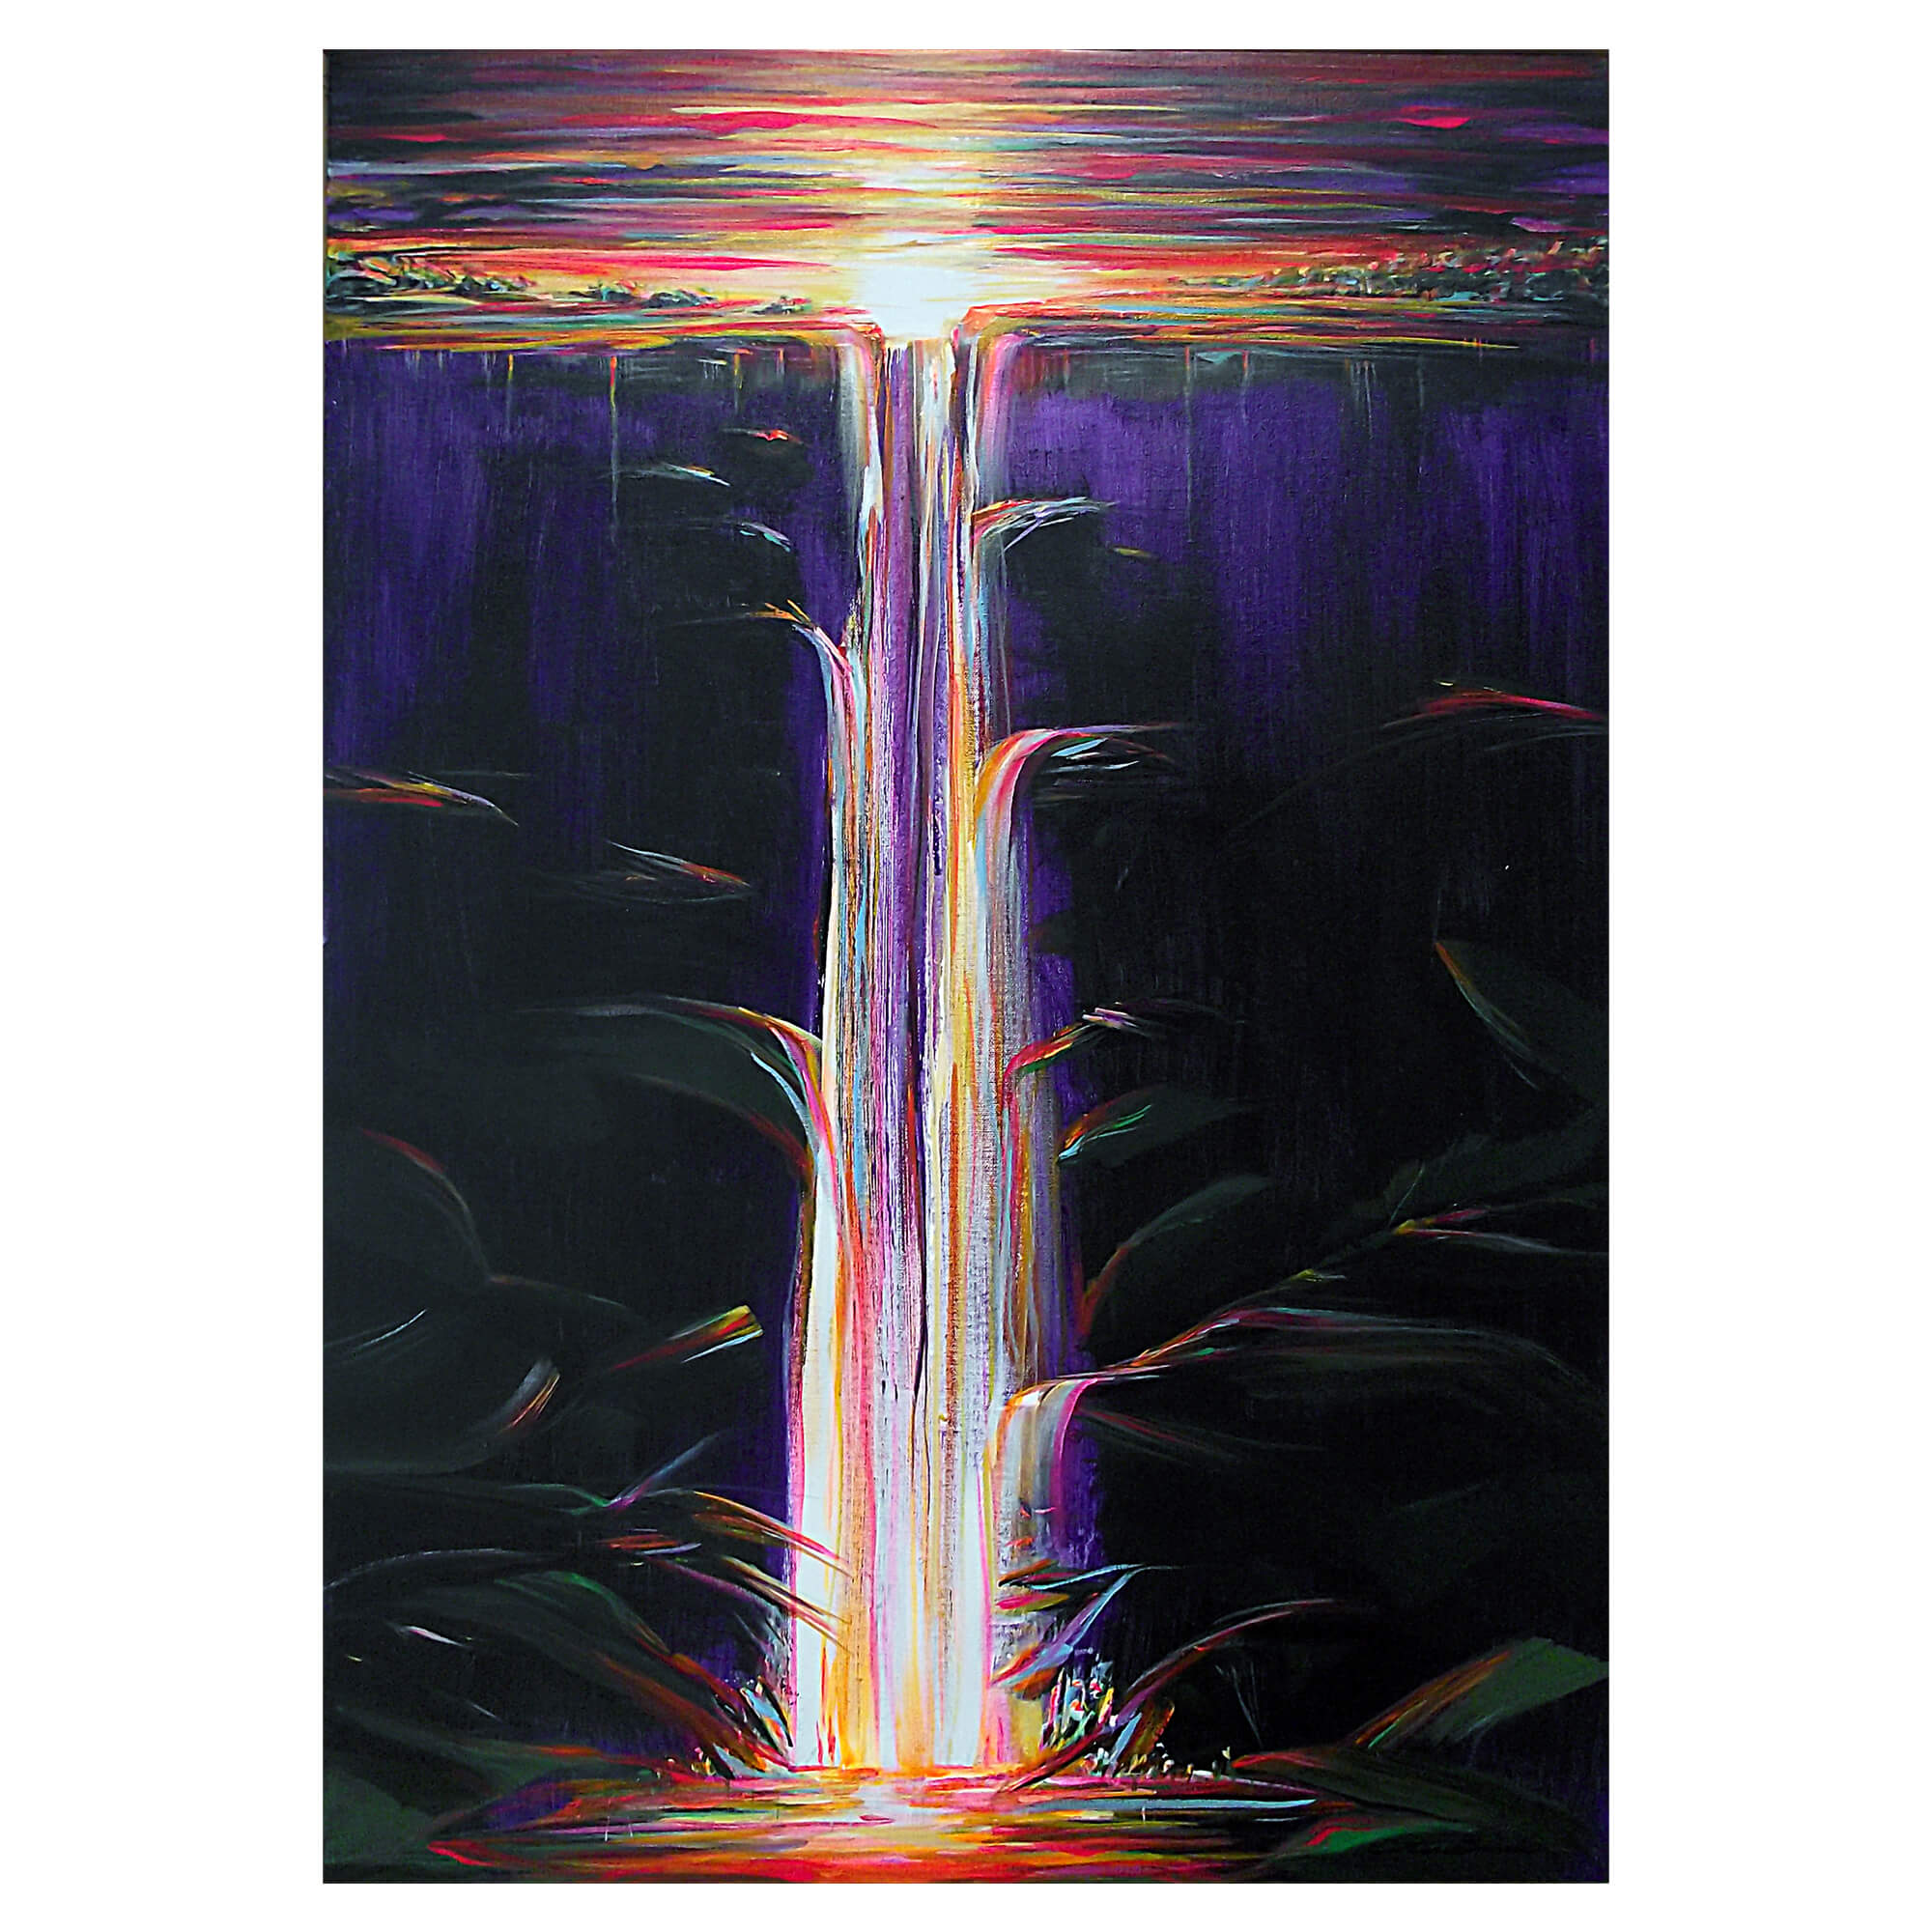 A waterfall with colorful flowing water and sky by Hawaii artist Jess Burda